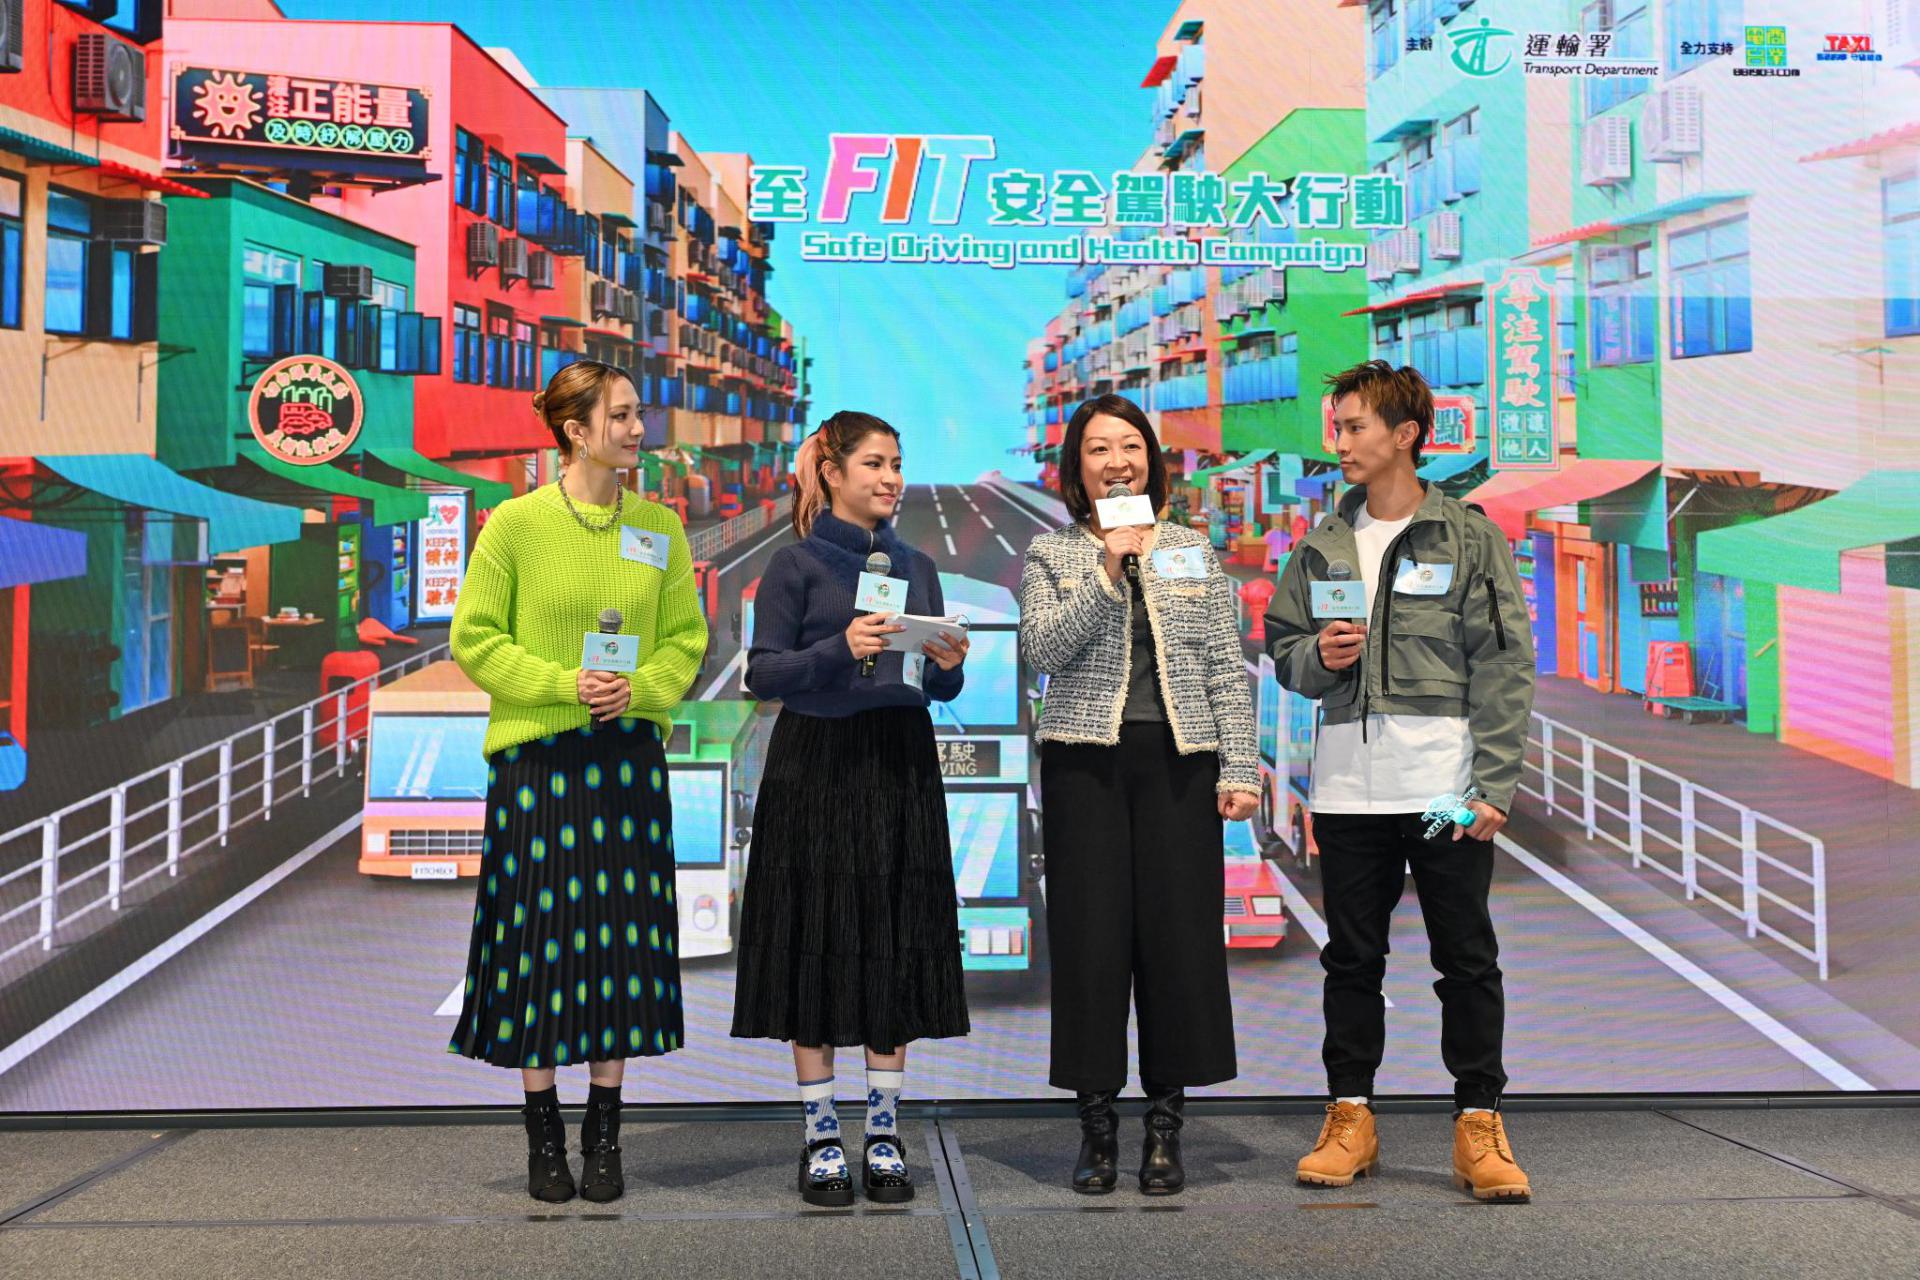 The Transport Department held a kick-off ceremony for the Safe Driving and Health Campaign today (February 1). Speaking at the ceremony, the Commissioner for Transport, Ms Angela Lee (second right), said that a promotional vehicle with a logo of the theme character, Miss FIT, on its body will from time to time tour various public transport interchanges in Hong Kong this year to encourage commercial vehicle drivers to continuously pay attention to safe driving and their health with a view to enhancing road safety.